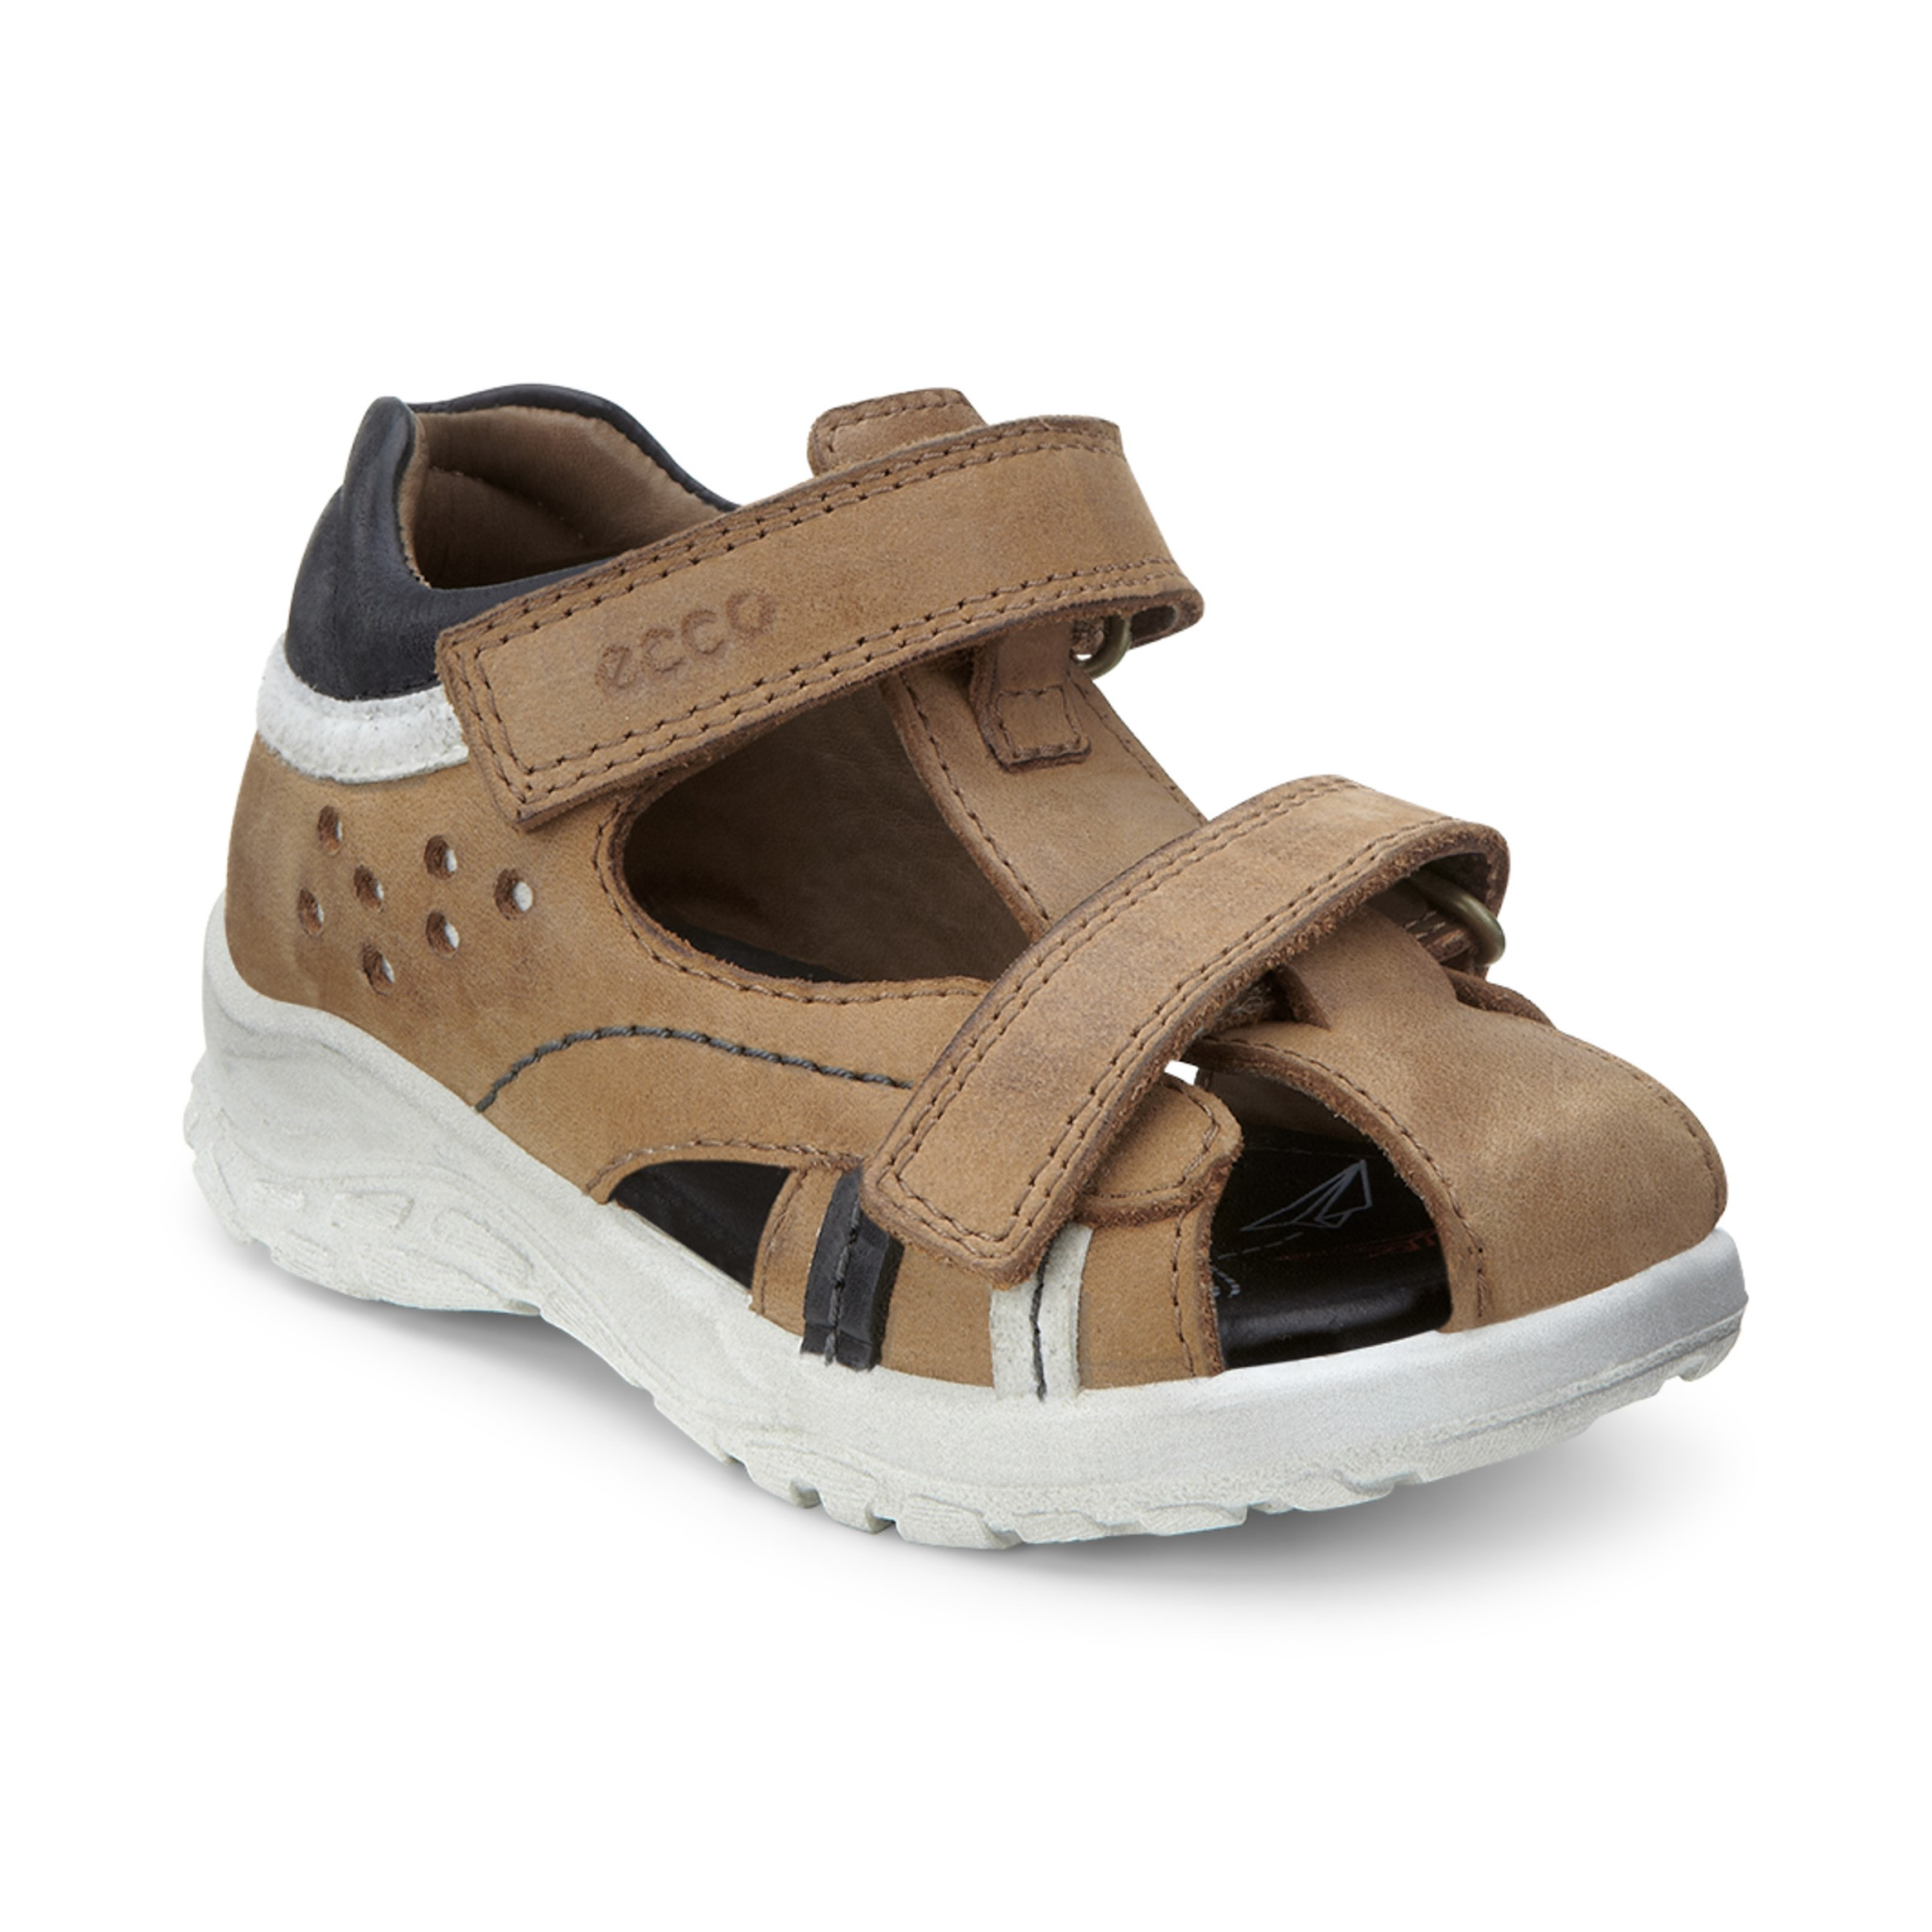 Ecco Sandal 24 - Products - Veryk Mall - Veryk Mall, product, quick safe your money!